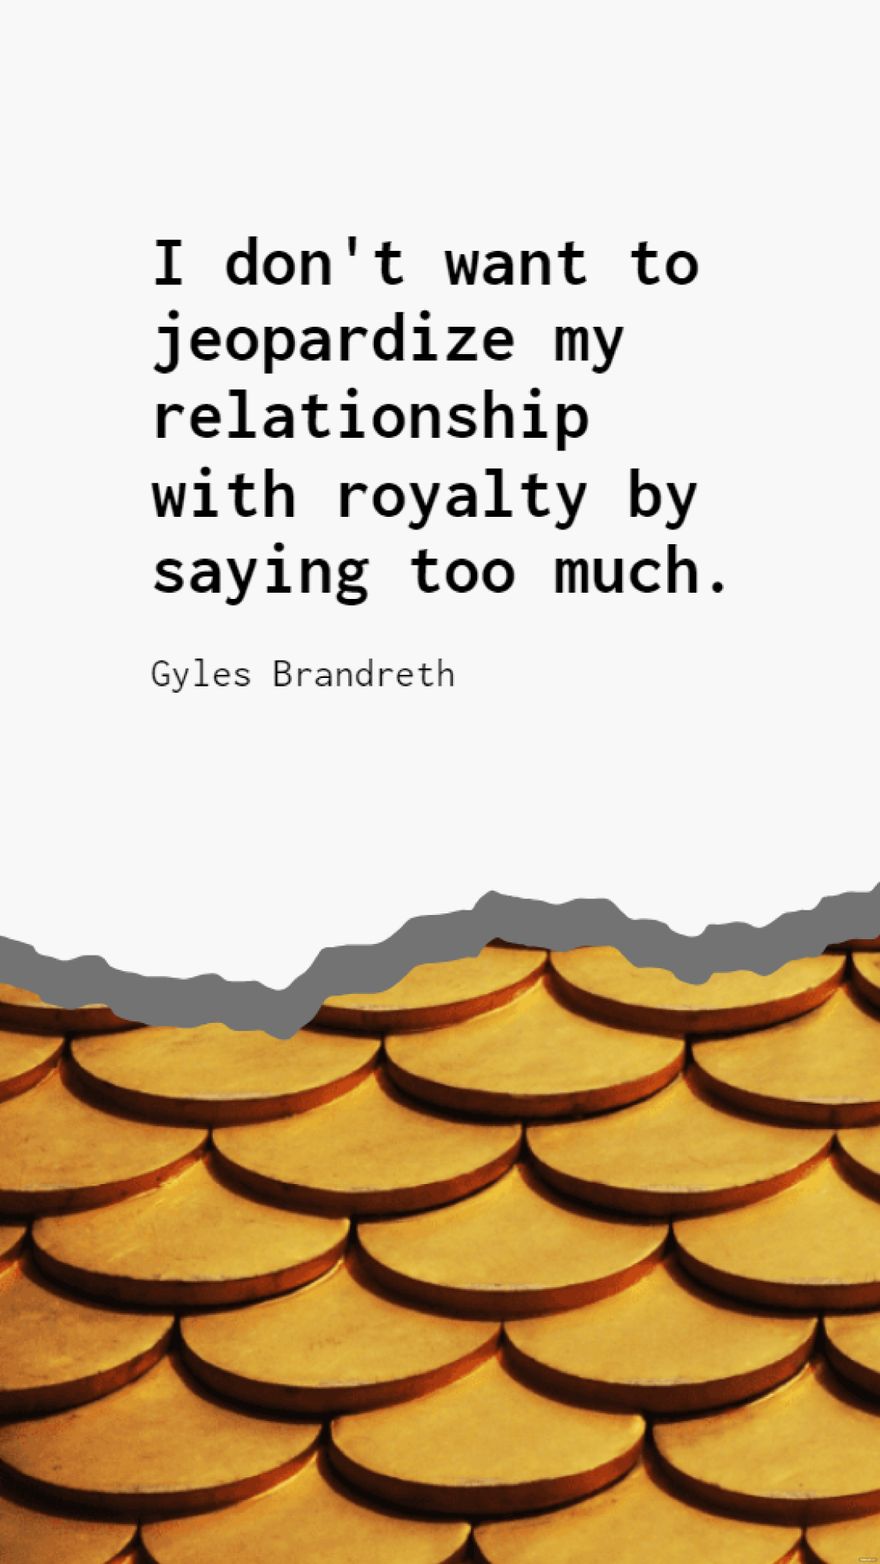 Gyles Brandreth - I don't want to jeopardize my relationship with royalty by saying too much.